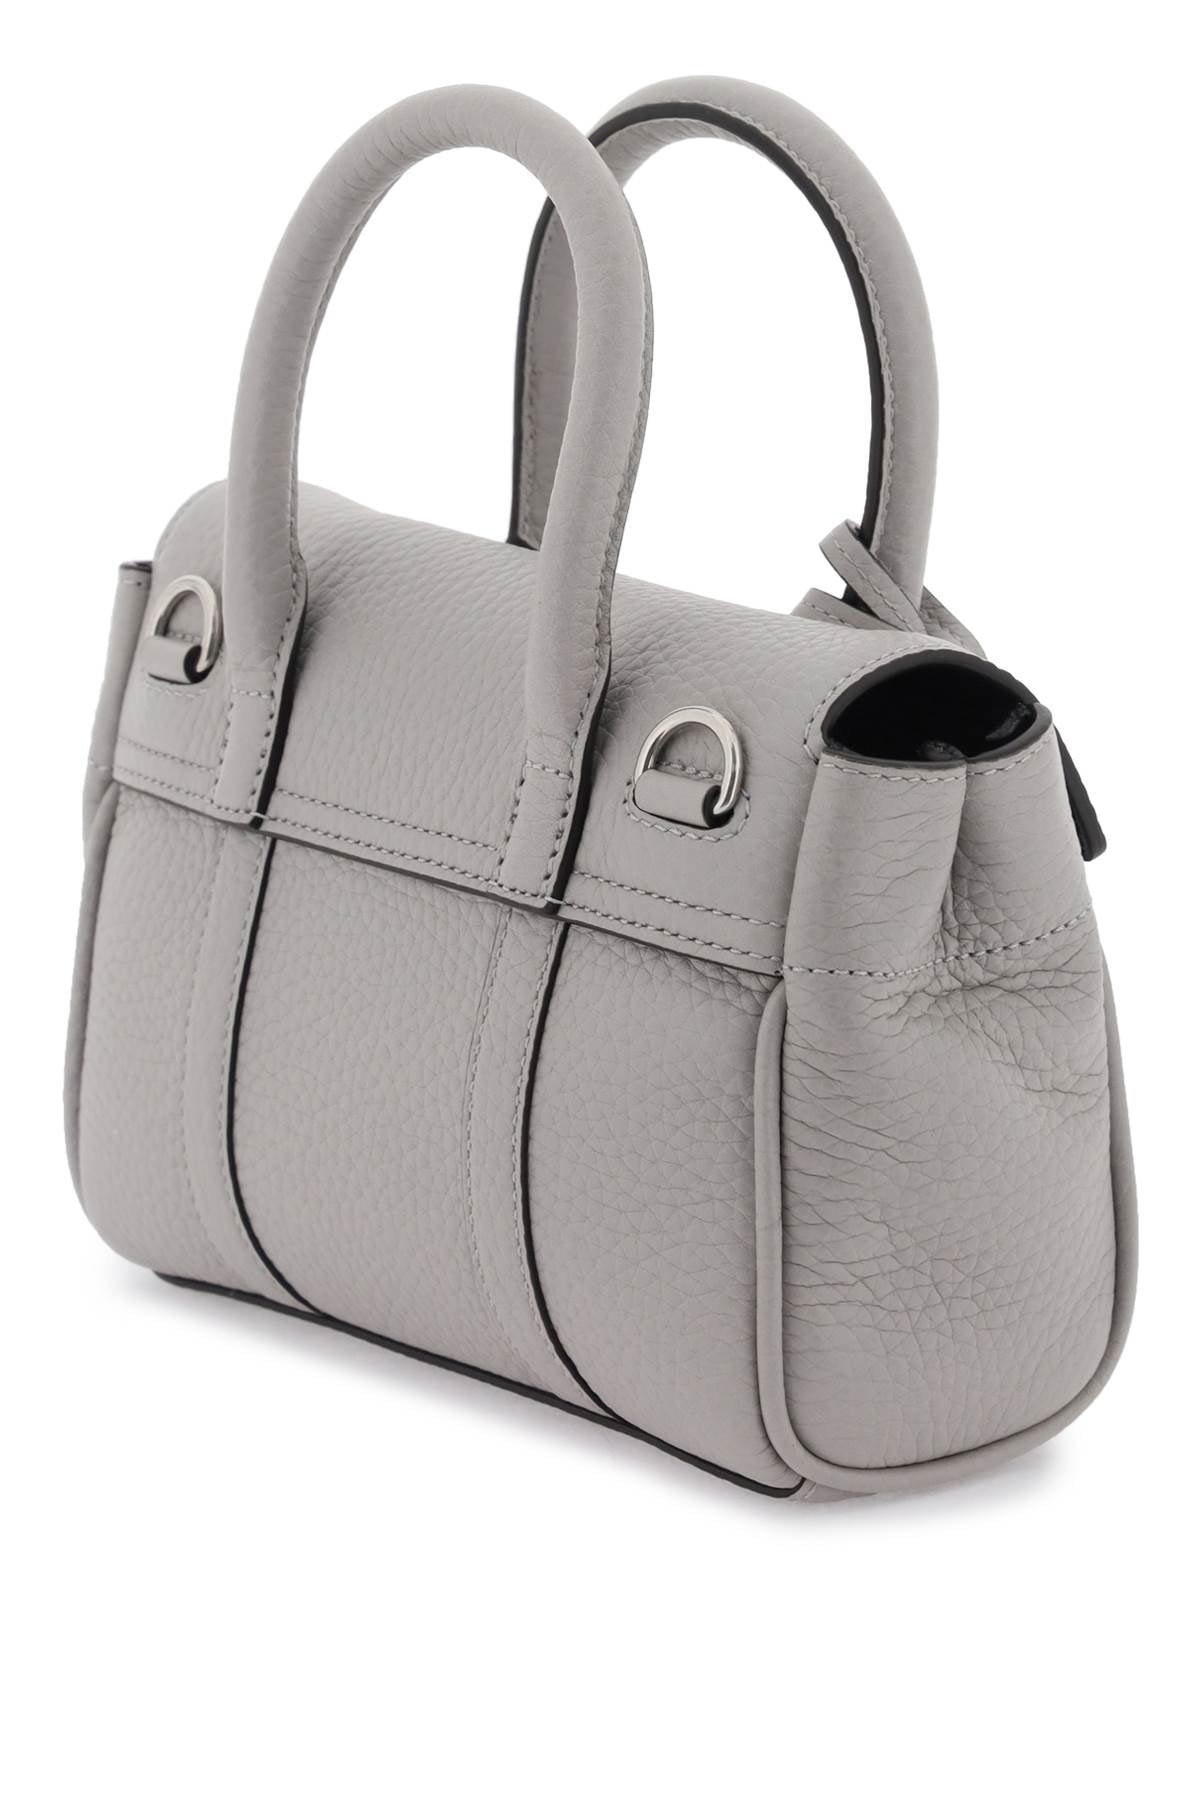 MULBERRY Mini Bayswater Iconic Grey Leather Handbag with Postman's Lock and Detachable Strap